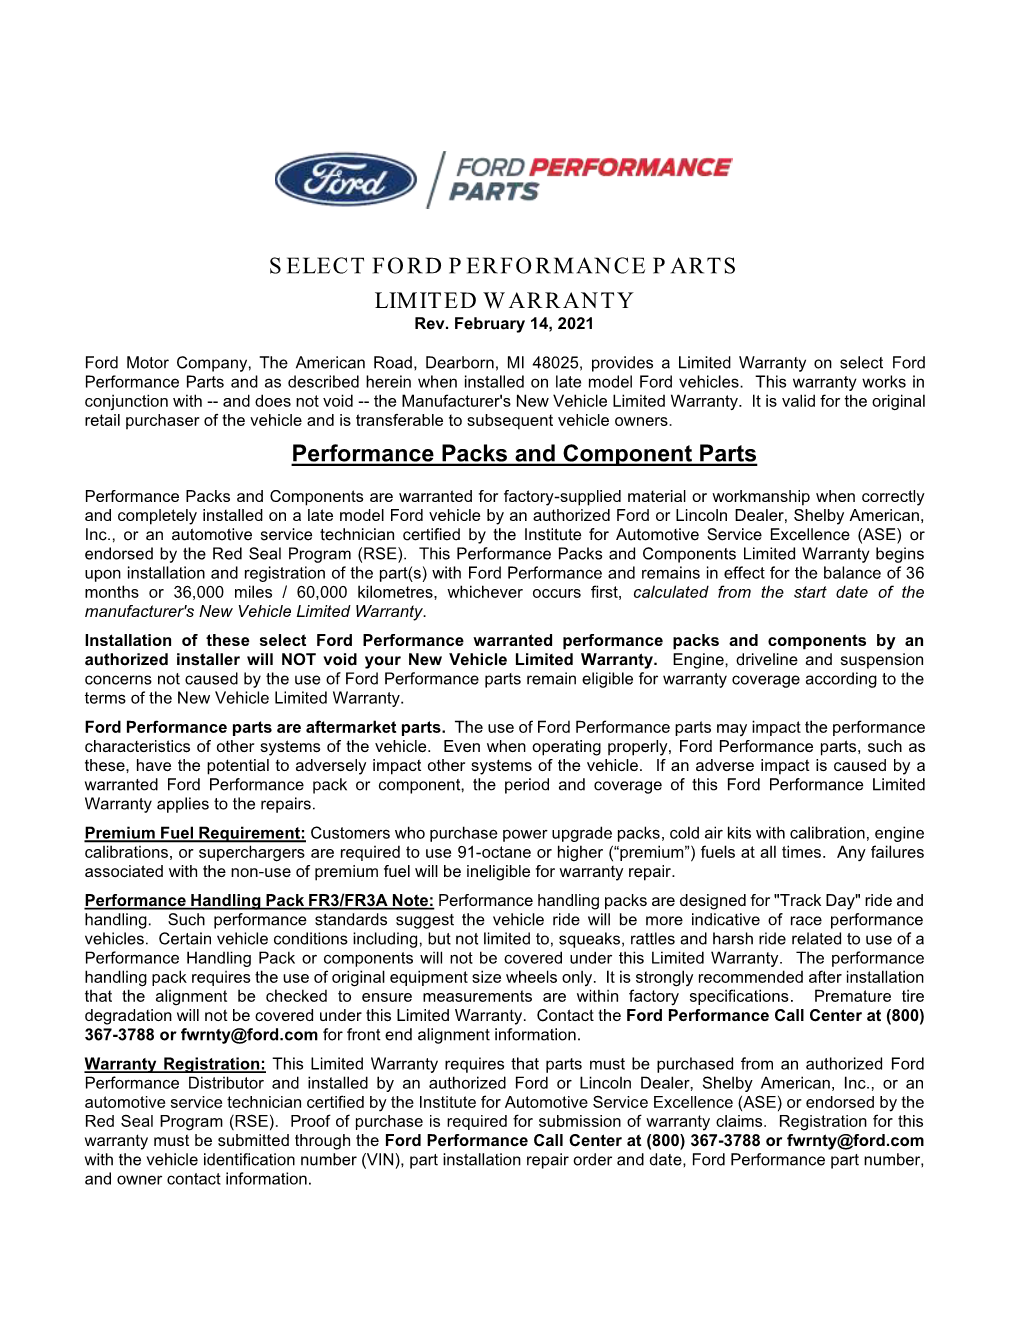 SELECT FORD PERFORMANCE PARTS LIMITED WARRANTY Rev